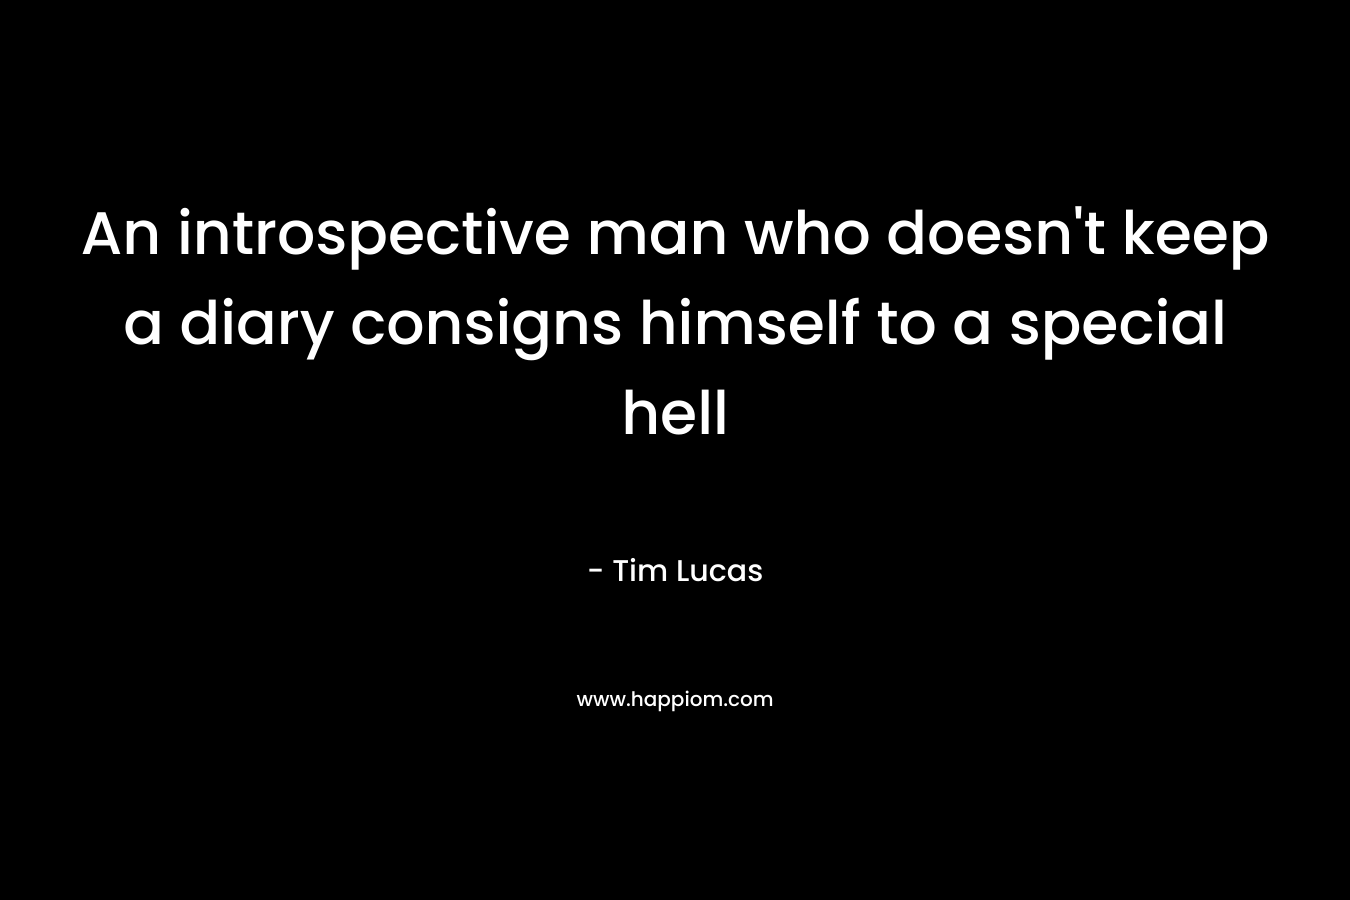 An introspective man who doesn’t keep a diary consigns himself to a special hell – Tim Lucas